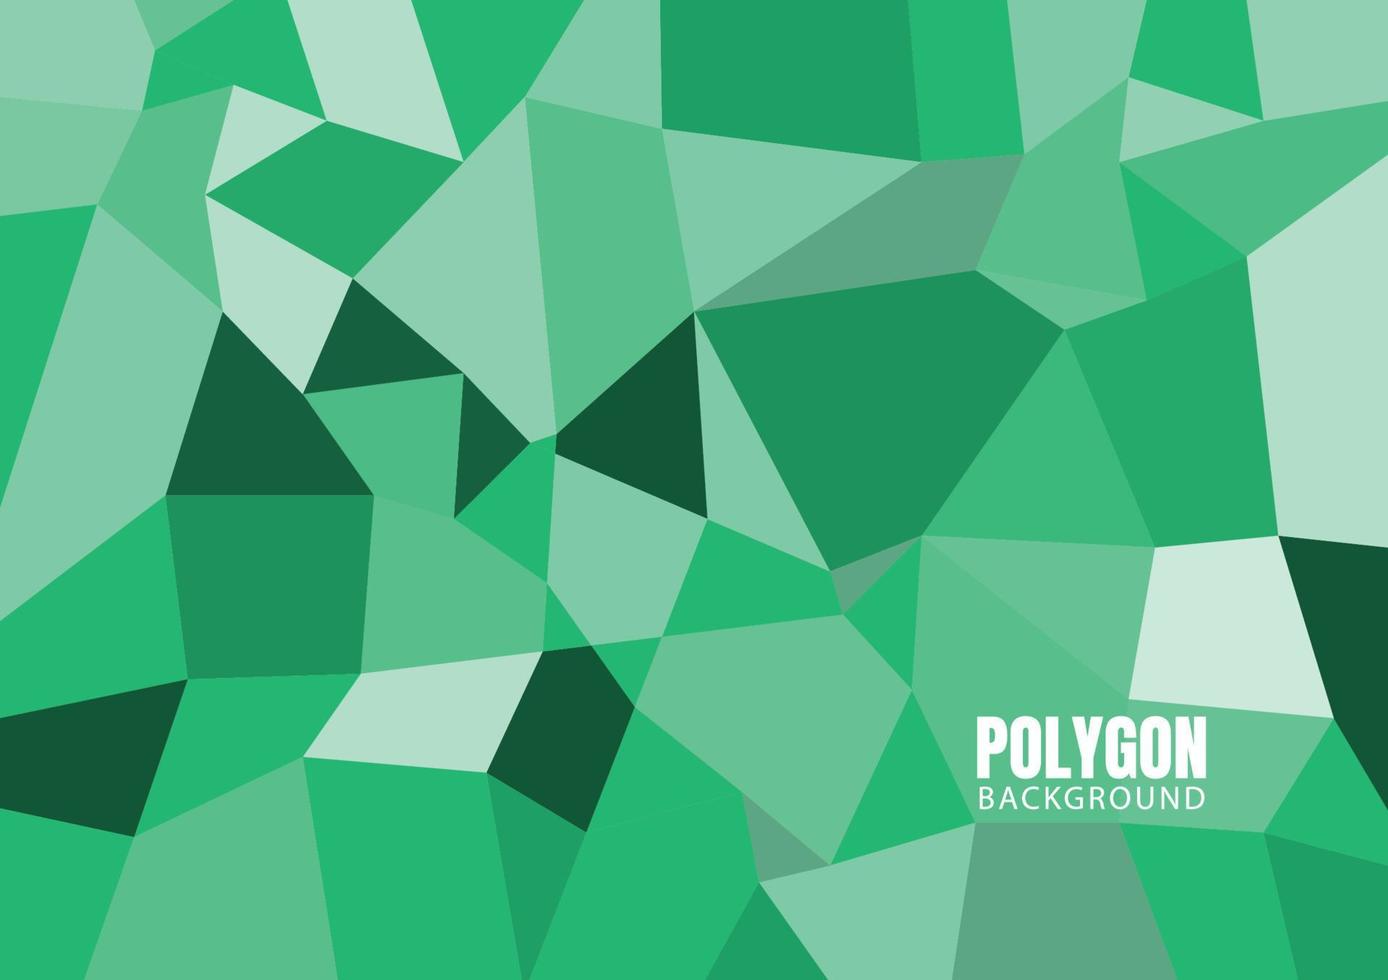 Polygon background with green Wallpaper or banner. vector